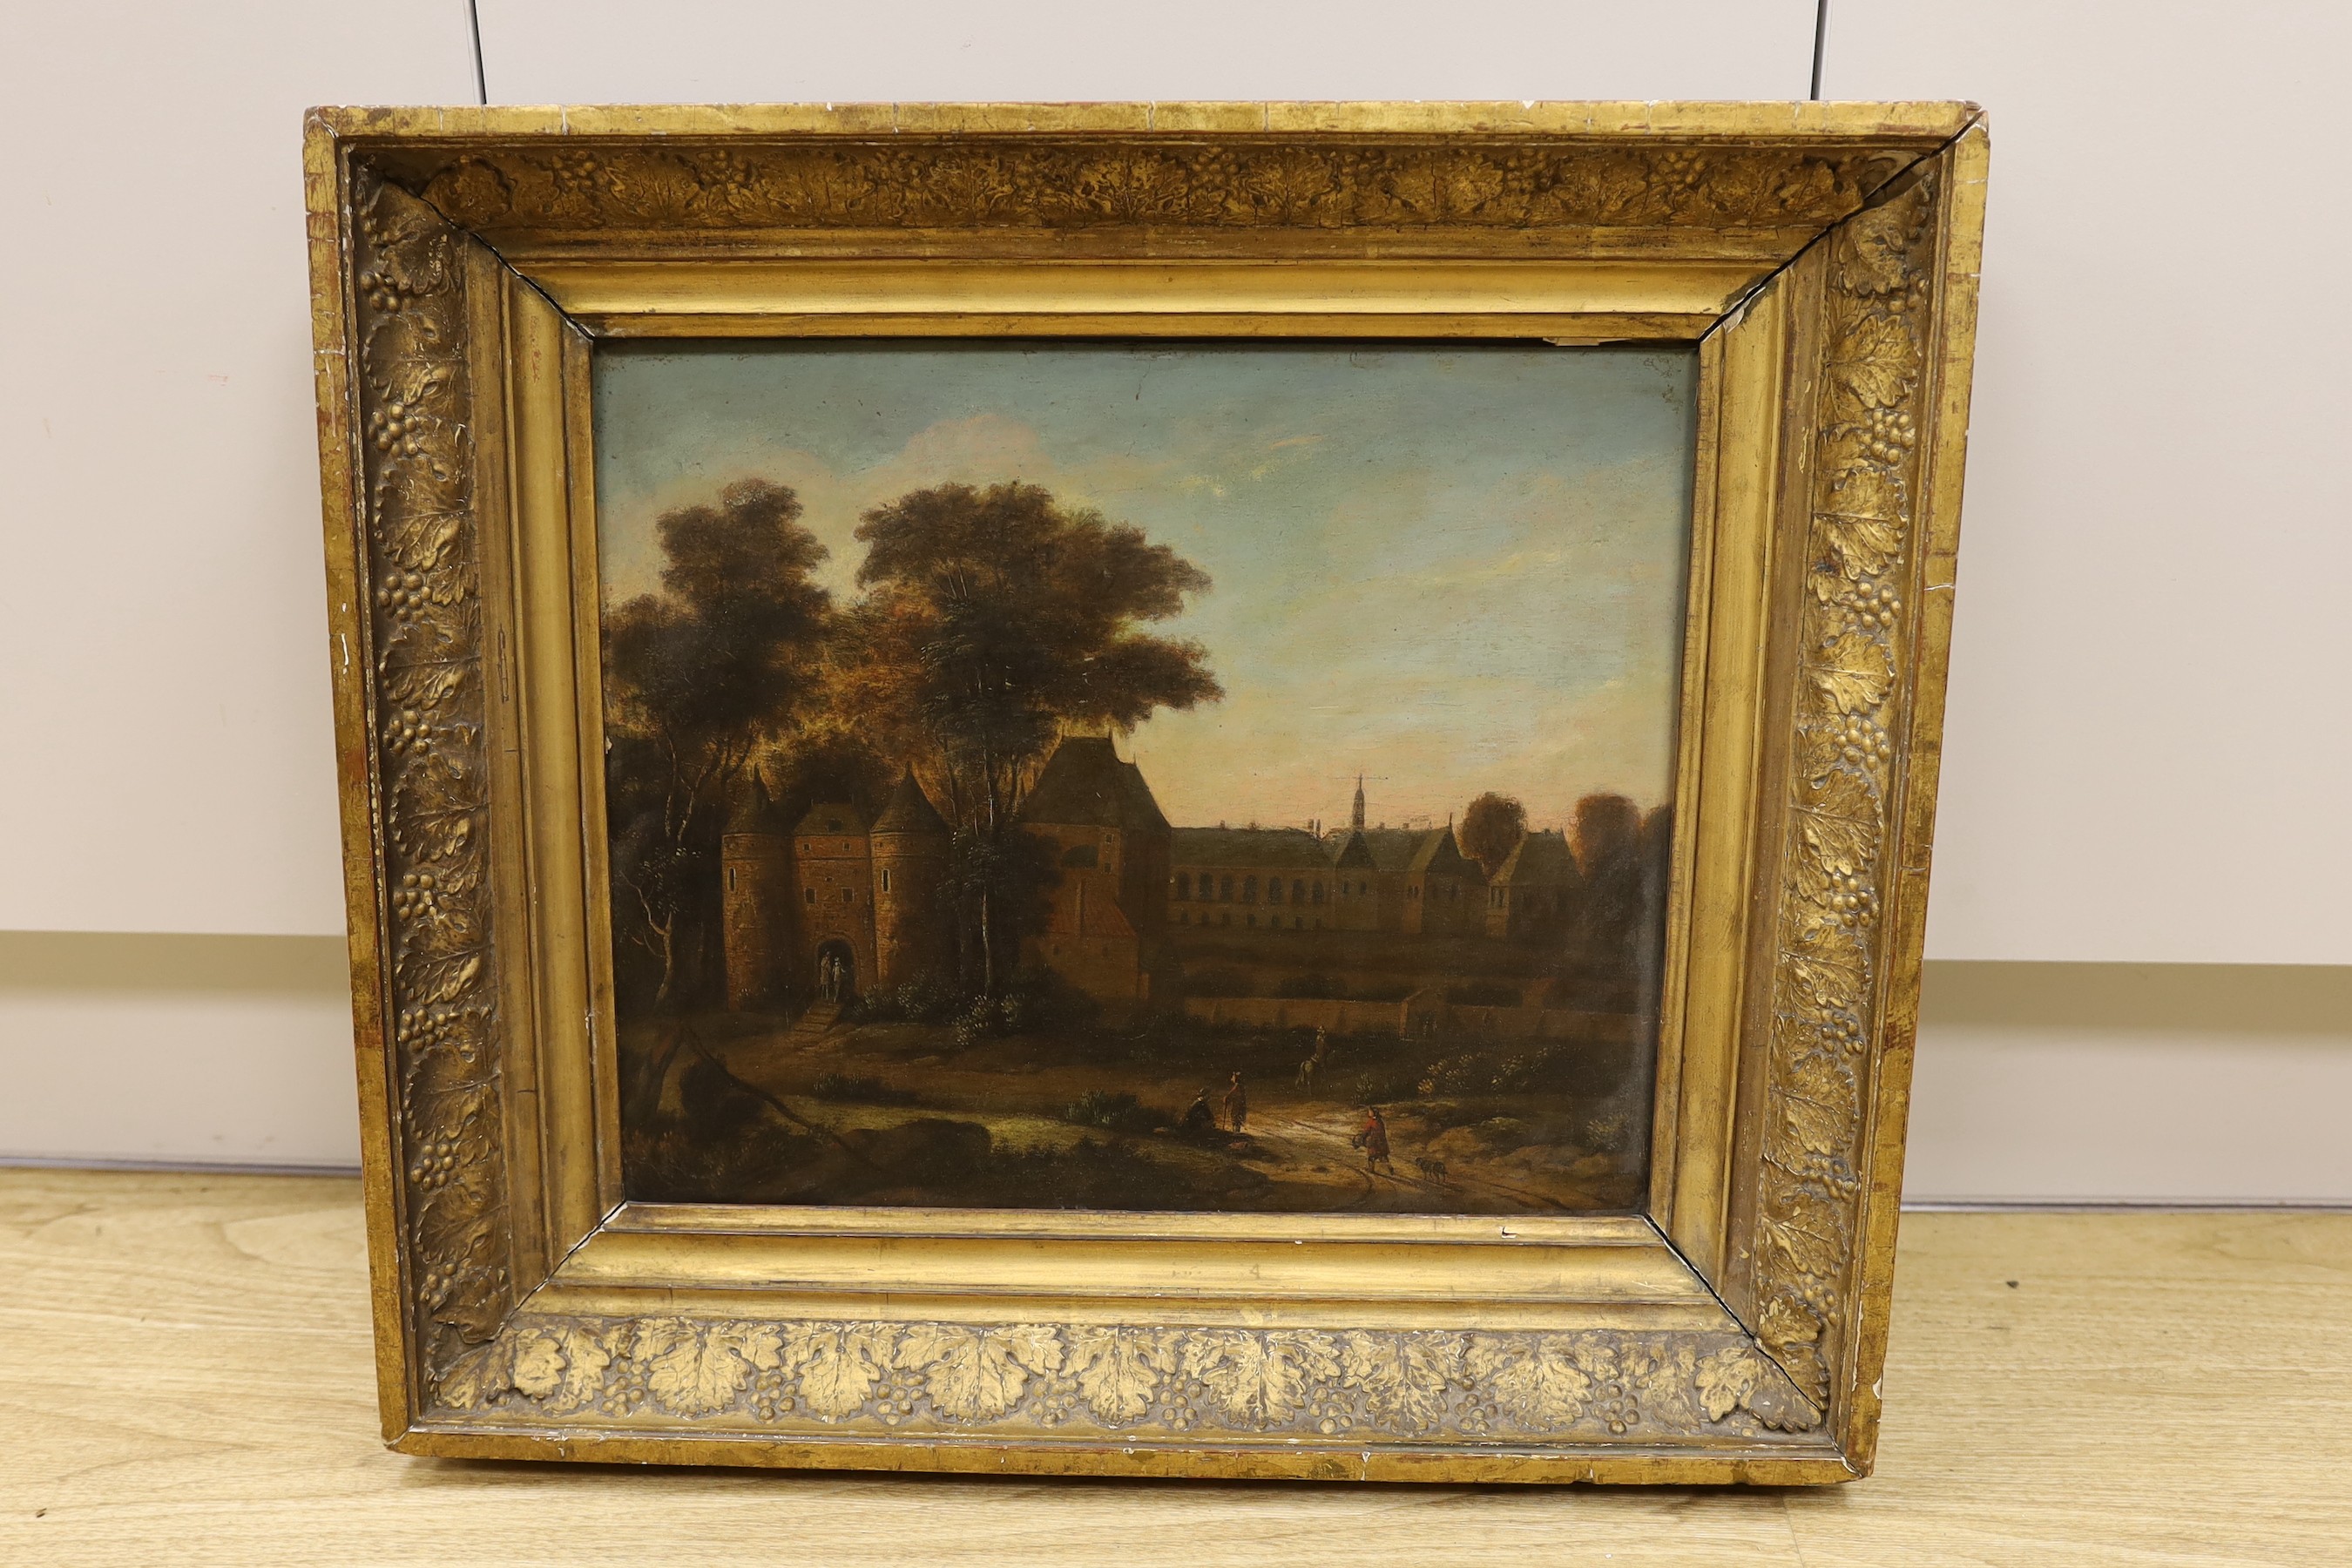 19th century Continental School, oil on wooden panel, View of a chateau, 35 x 41cm - Image 2 of 2